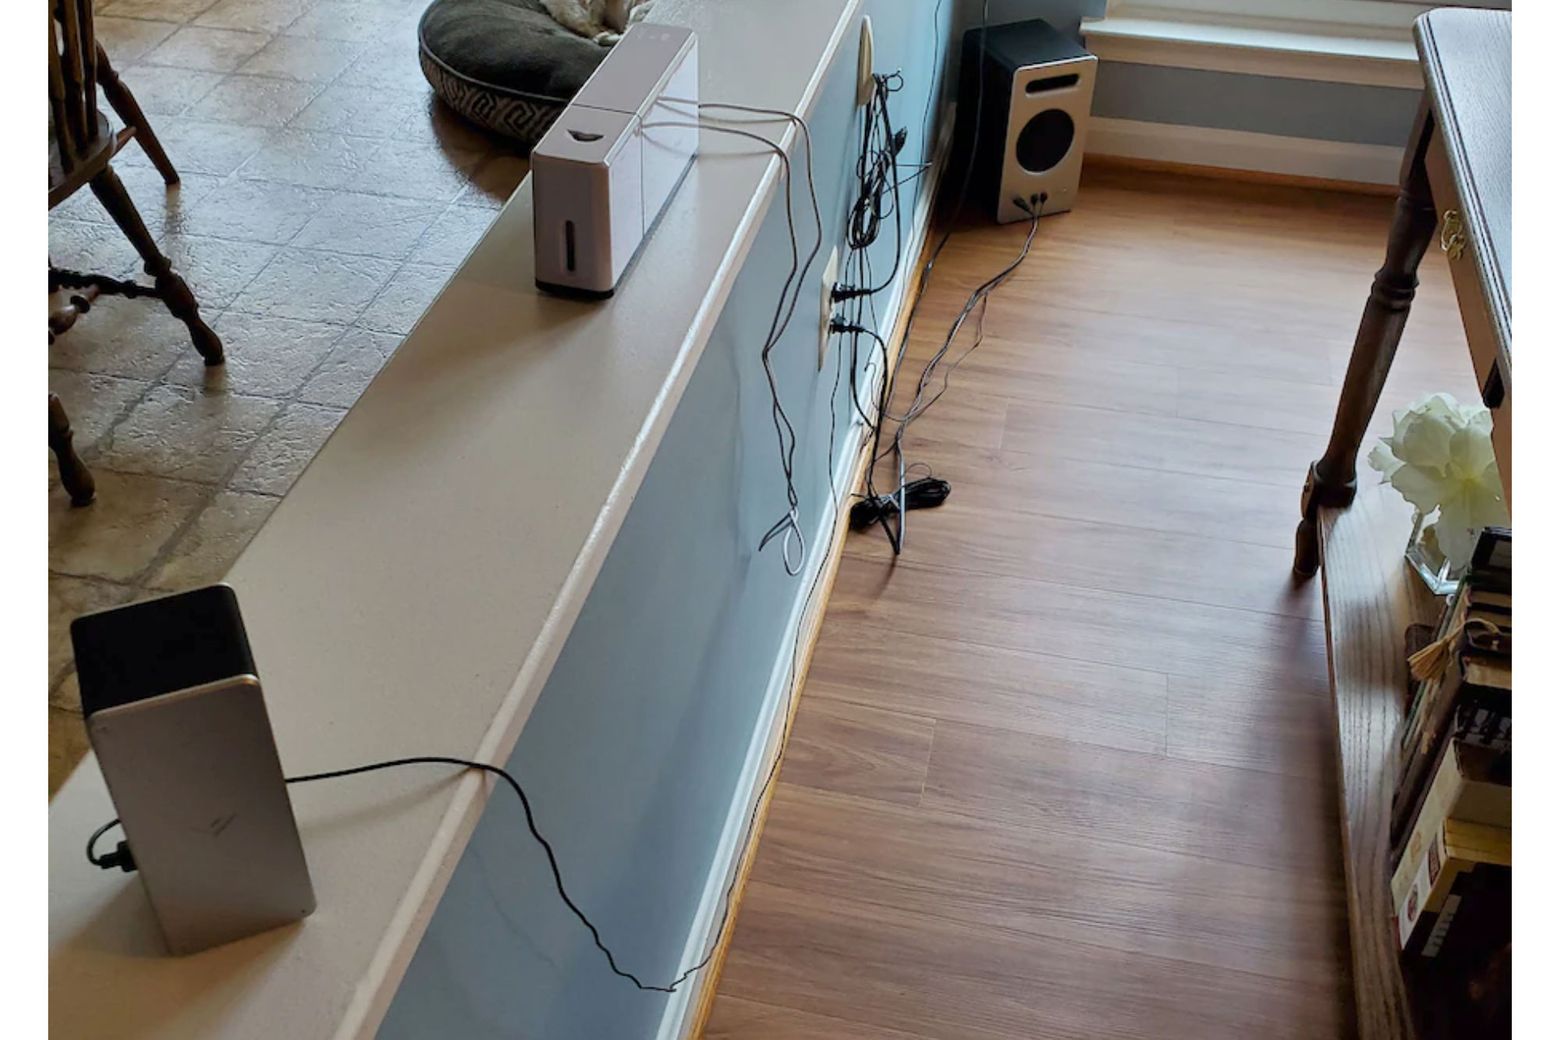 How to Hide Cords and Other Eyesores in a Room